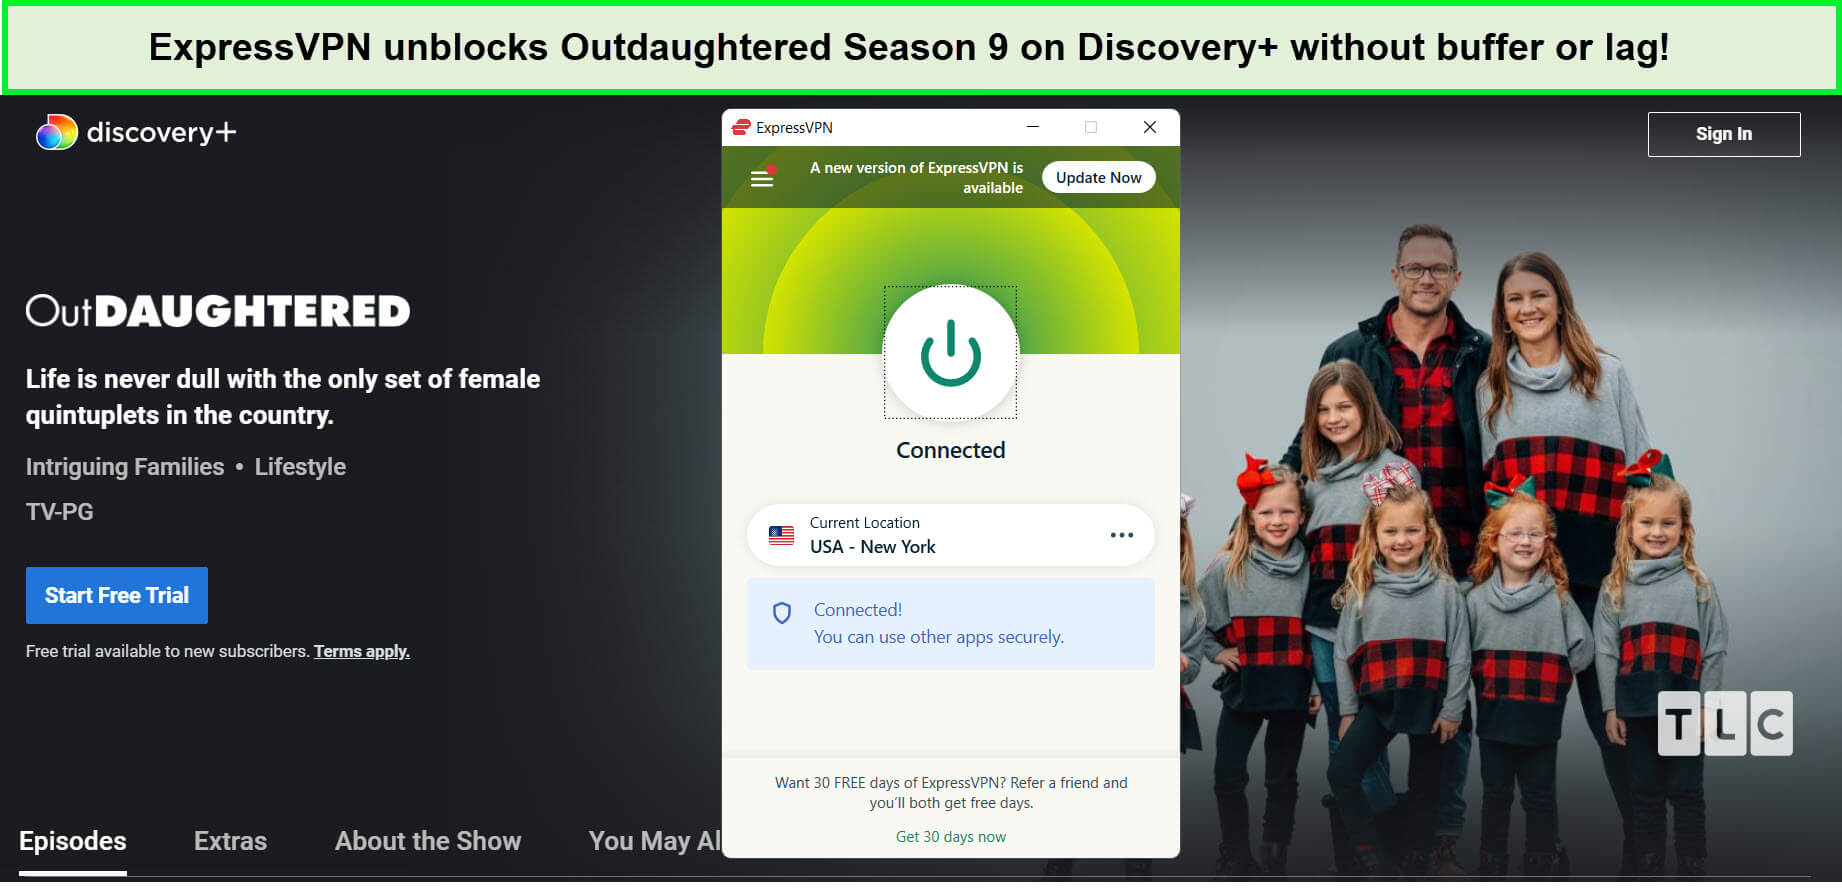 expressvpn-unblocks-outdaughtered-season-nine-on-discovery-plus-in-Italy